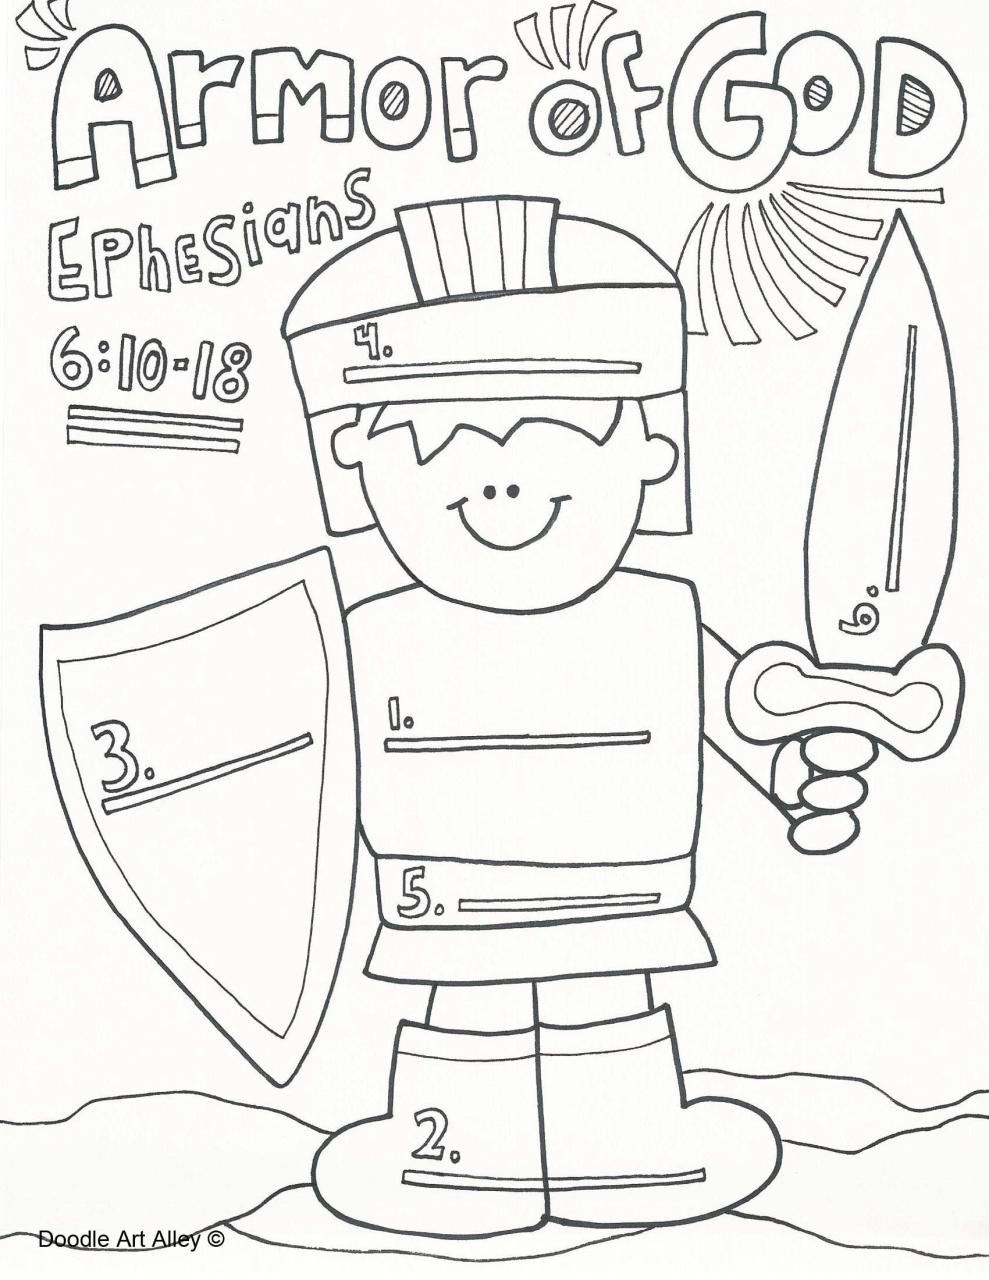 Armor Of God Coloring Pages For Adults